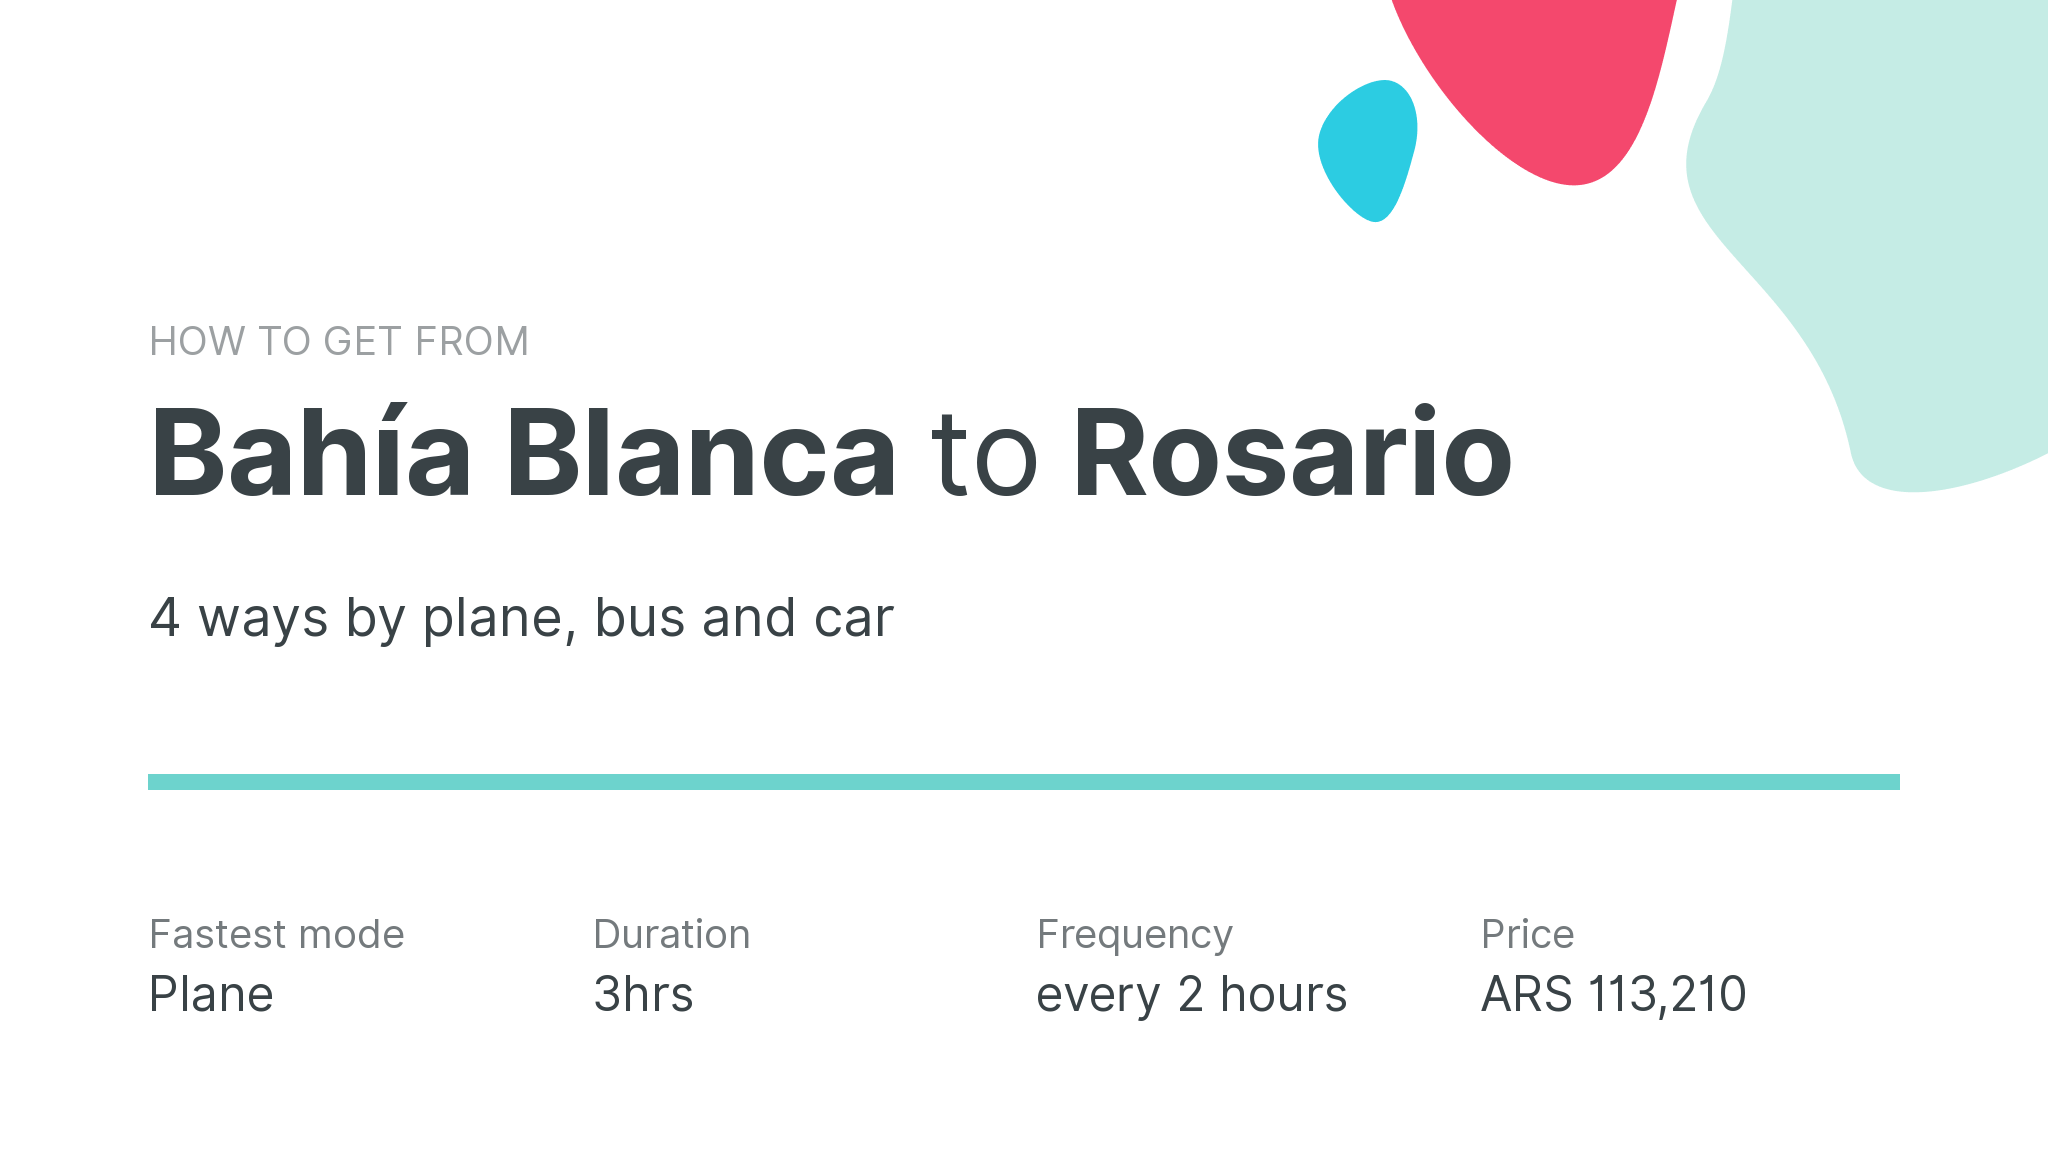 How do I get from Bahía Blanca to Rosario